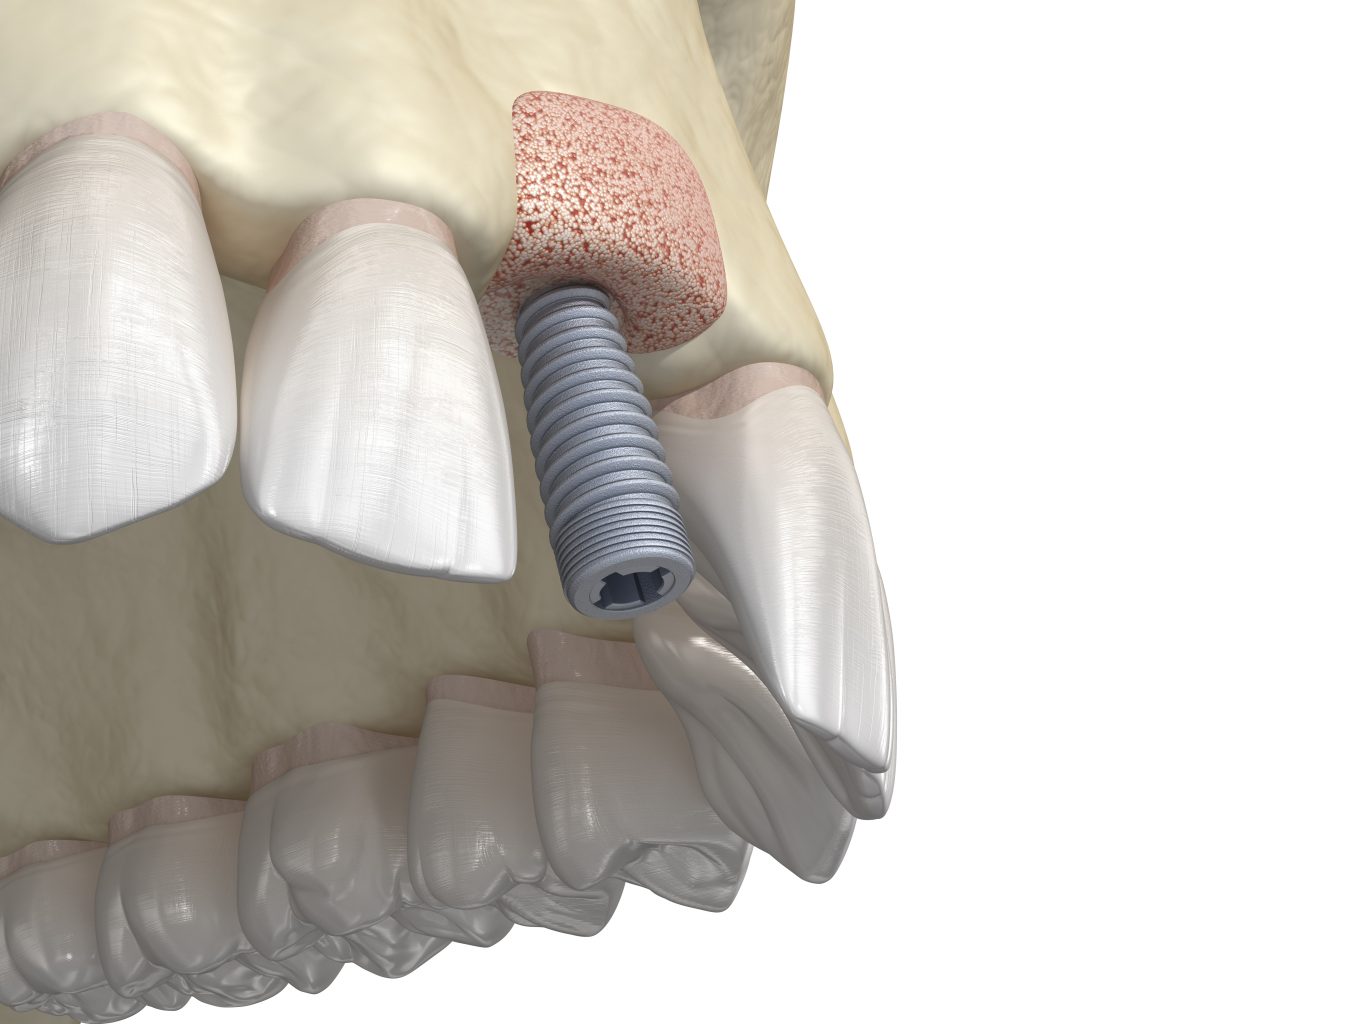 Bone Grafting Augmentation Using Ring Method, Tooth Implantation. Medically Accurate 3d Illustration